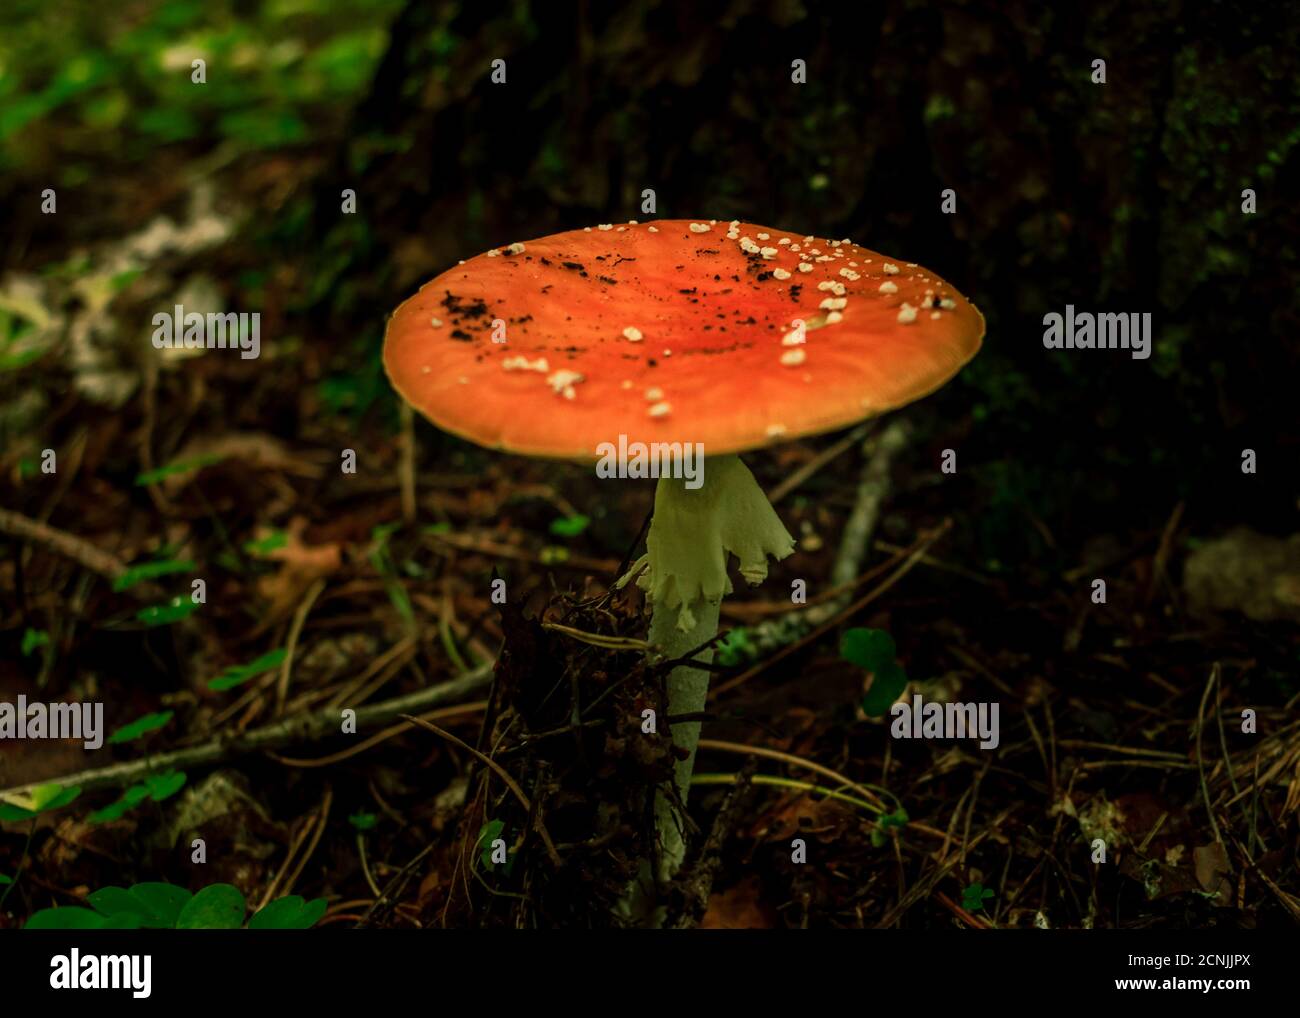 orange mushroom with white dots, death cup poisen plant growing in a green rain forest, blur background Stock Photo